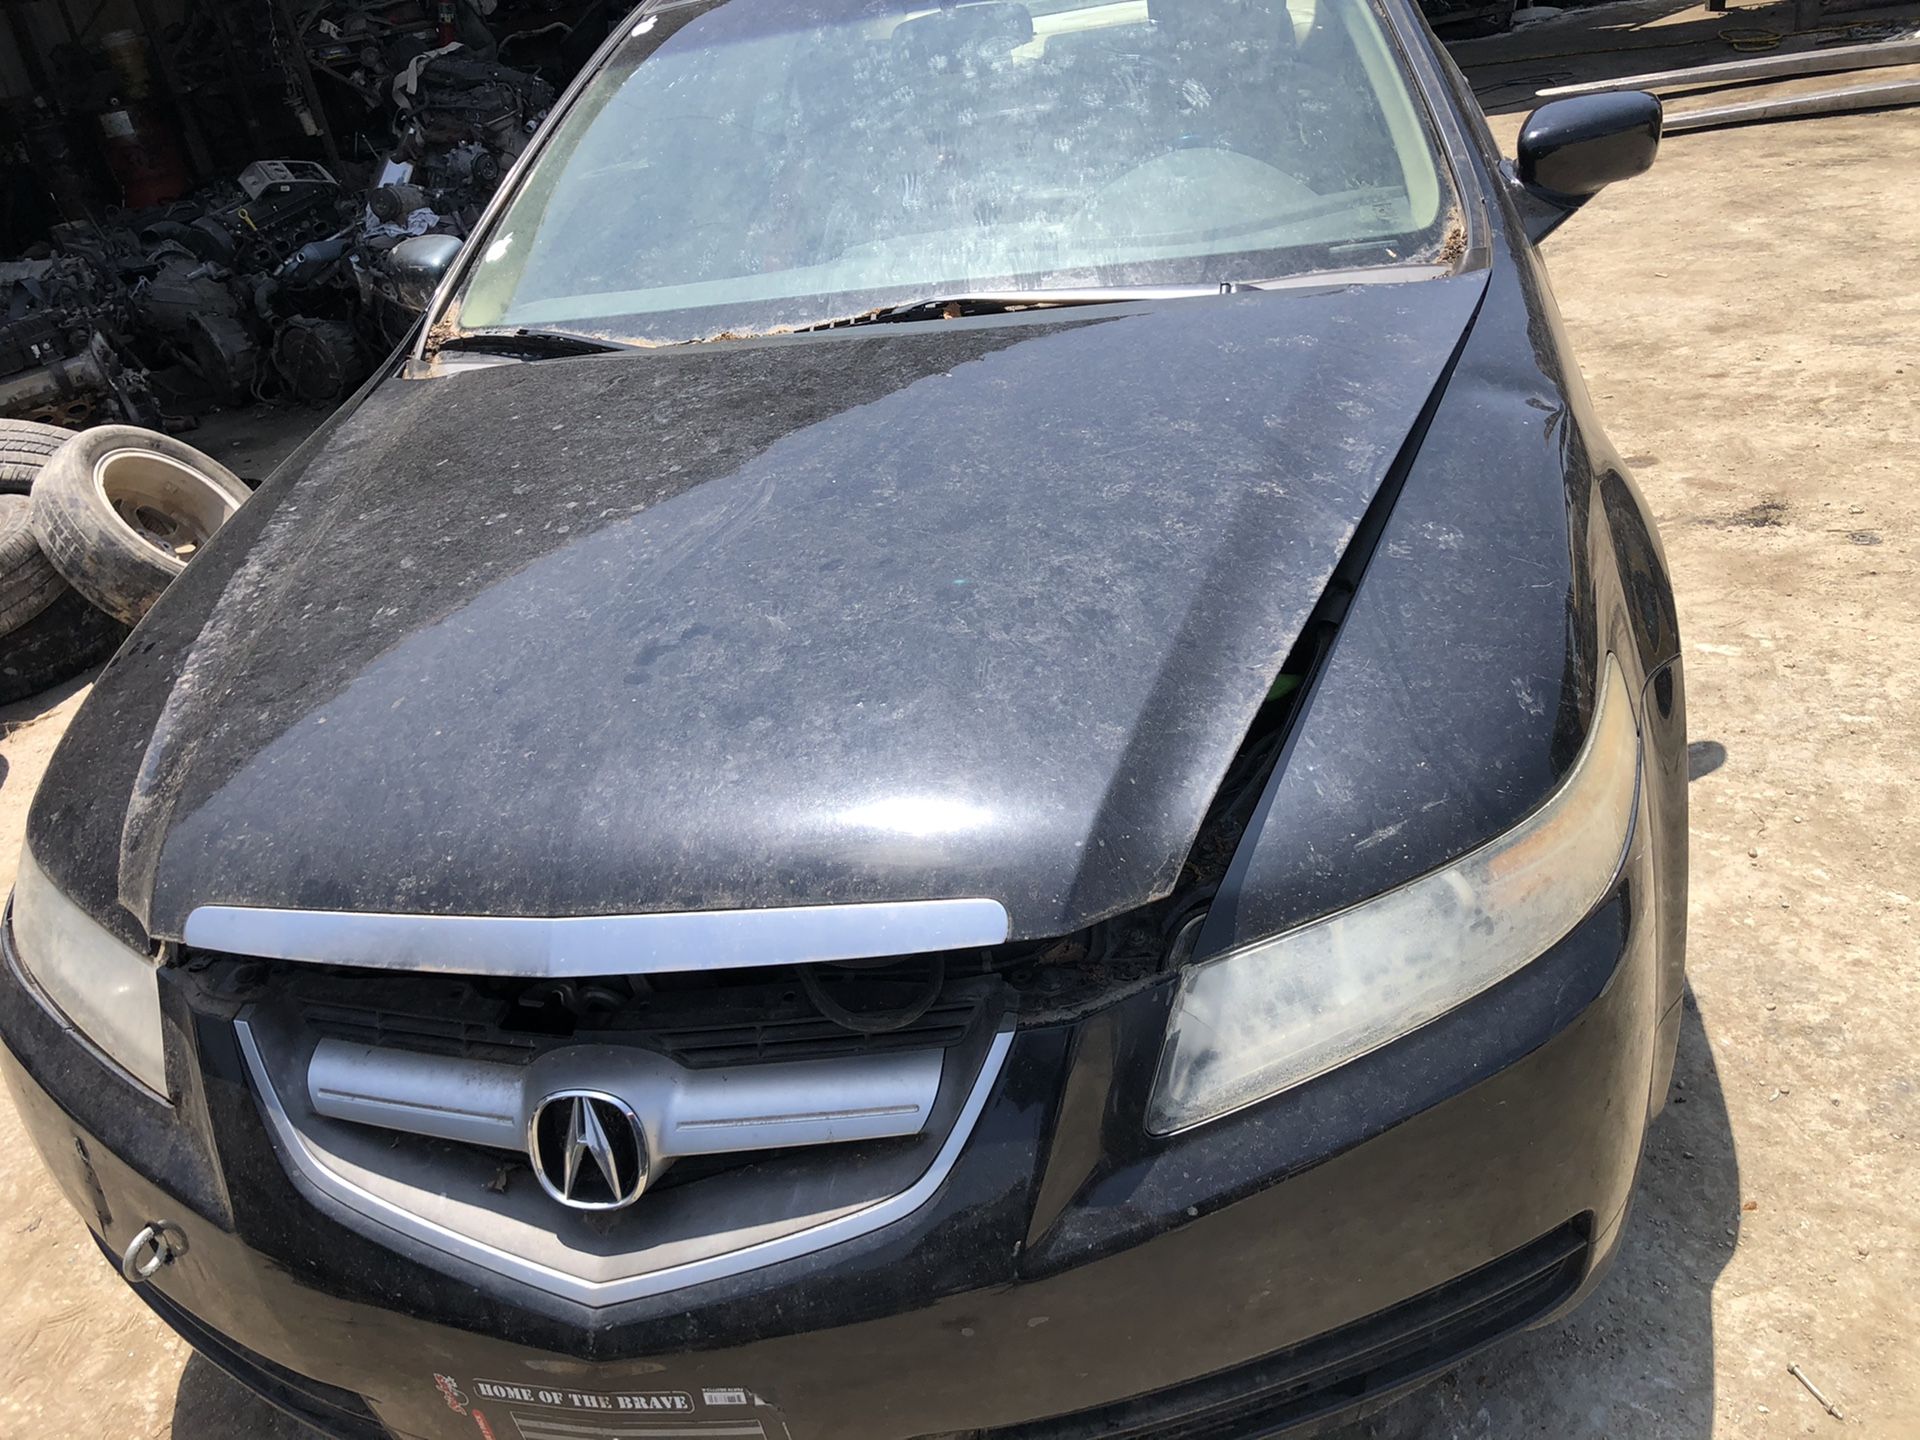 2006 Acura TL for parts